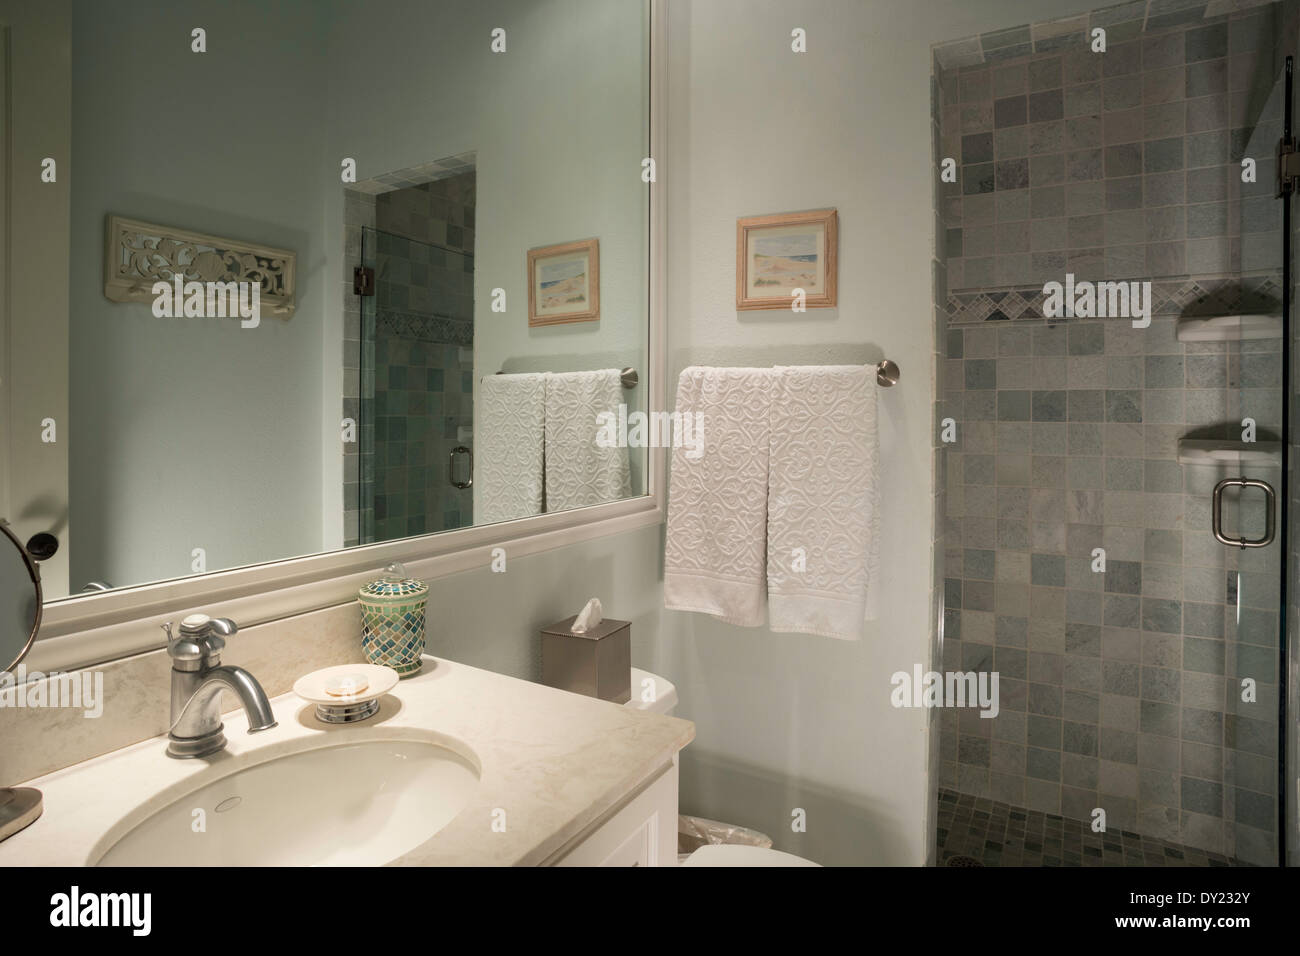 Clean and Tidy White Bathroom with Glass Shower Stall Door, USA Stock Photo